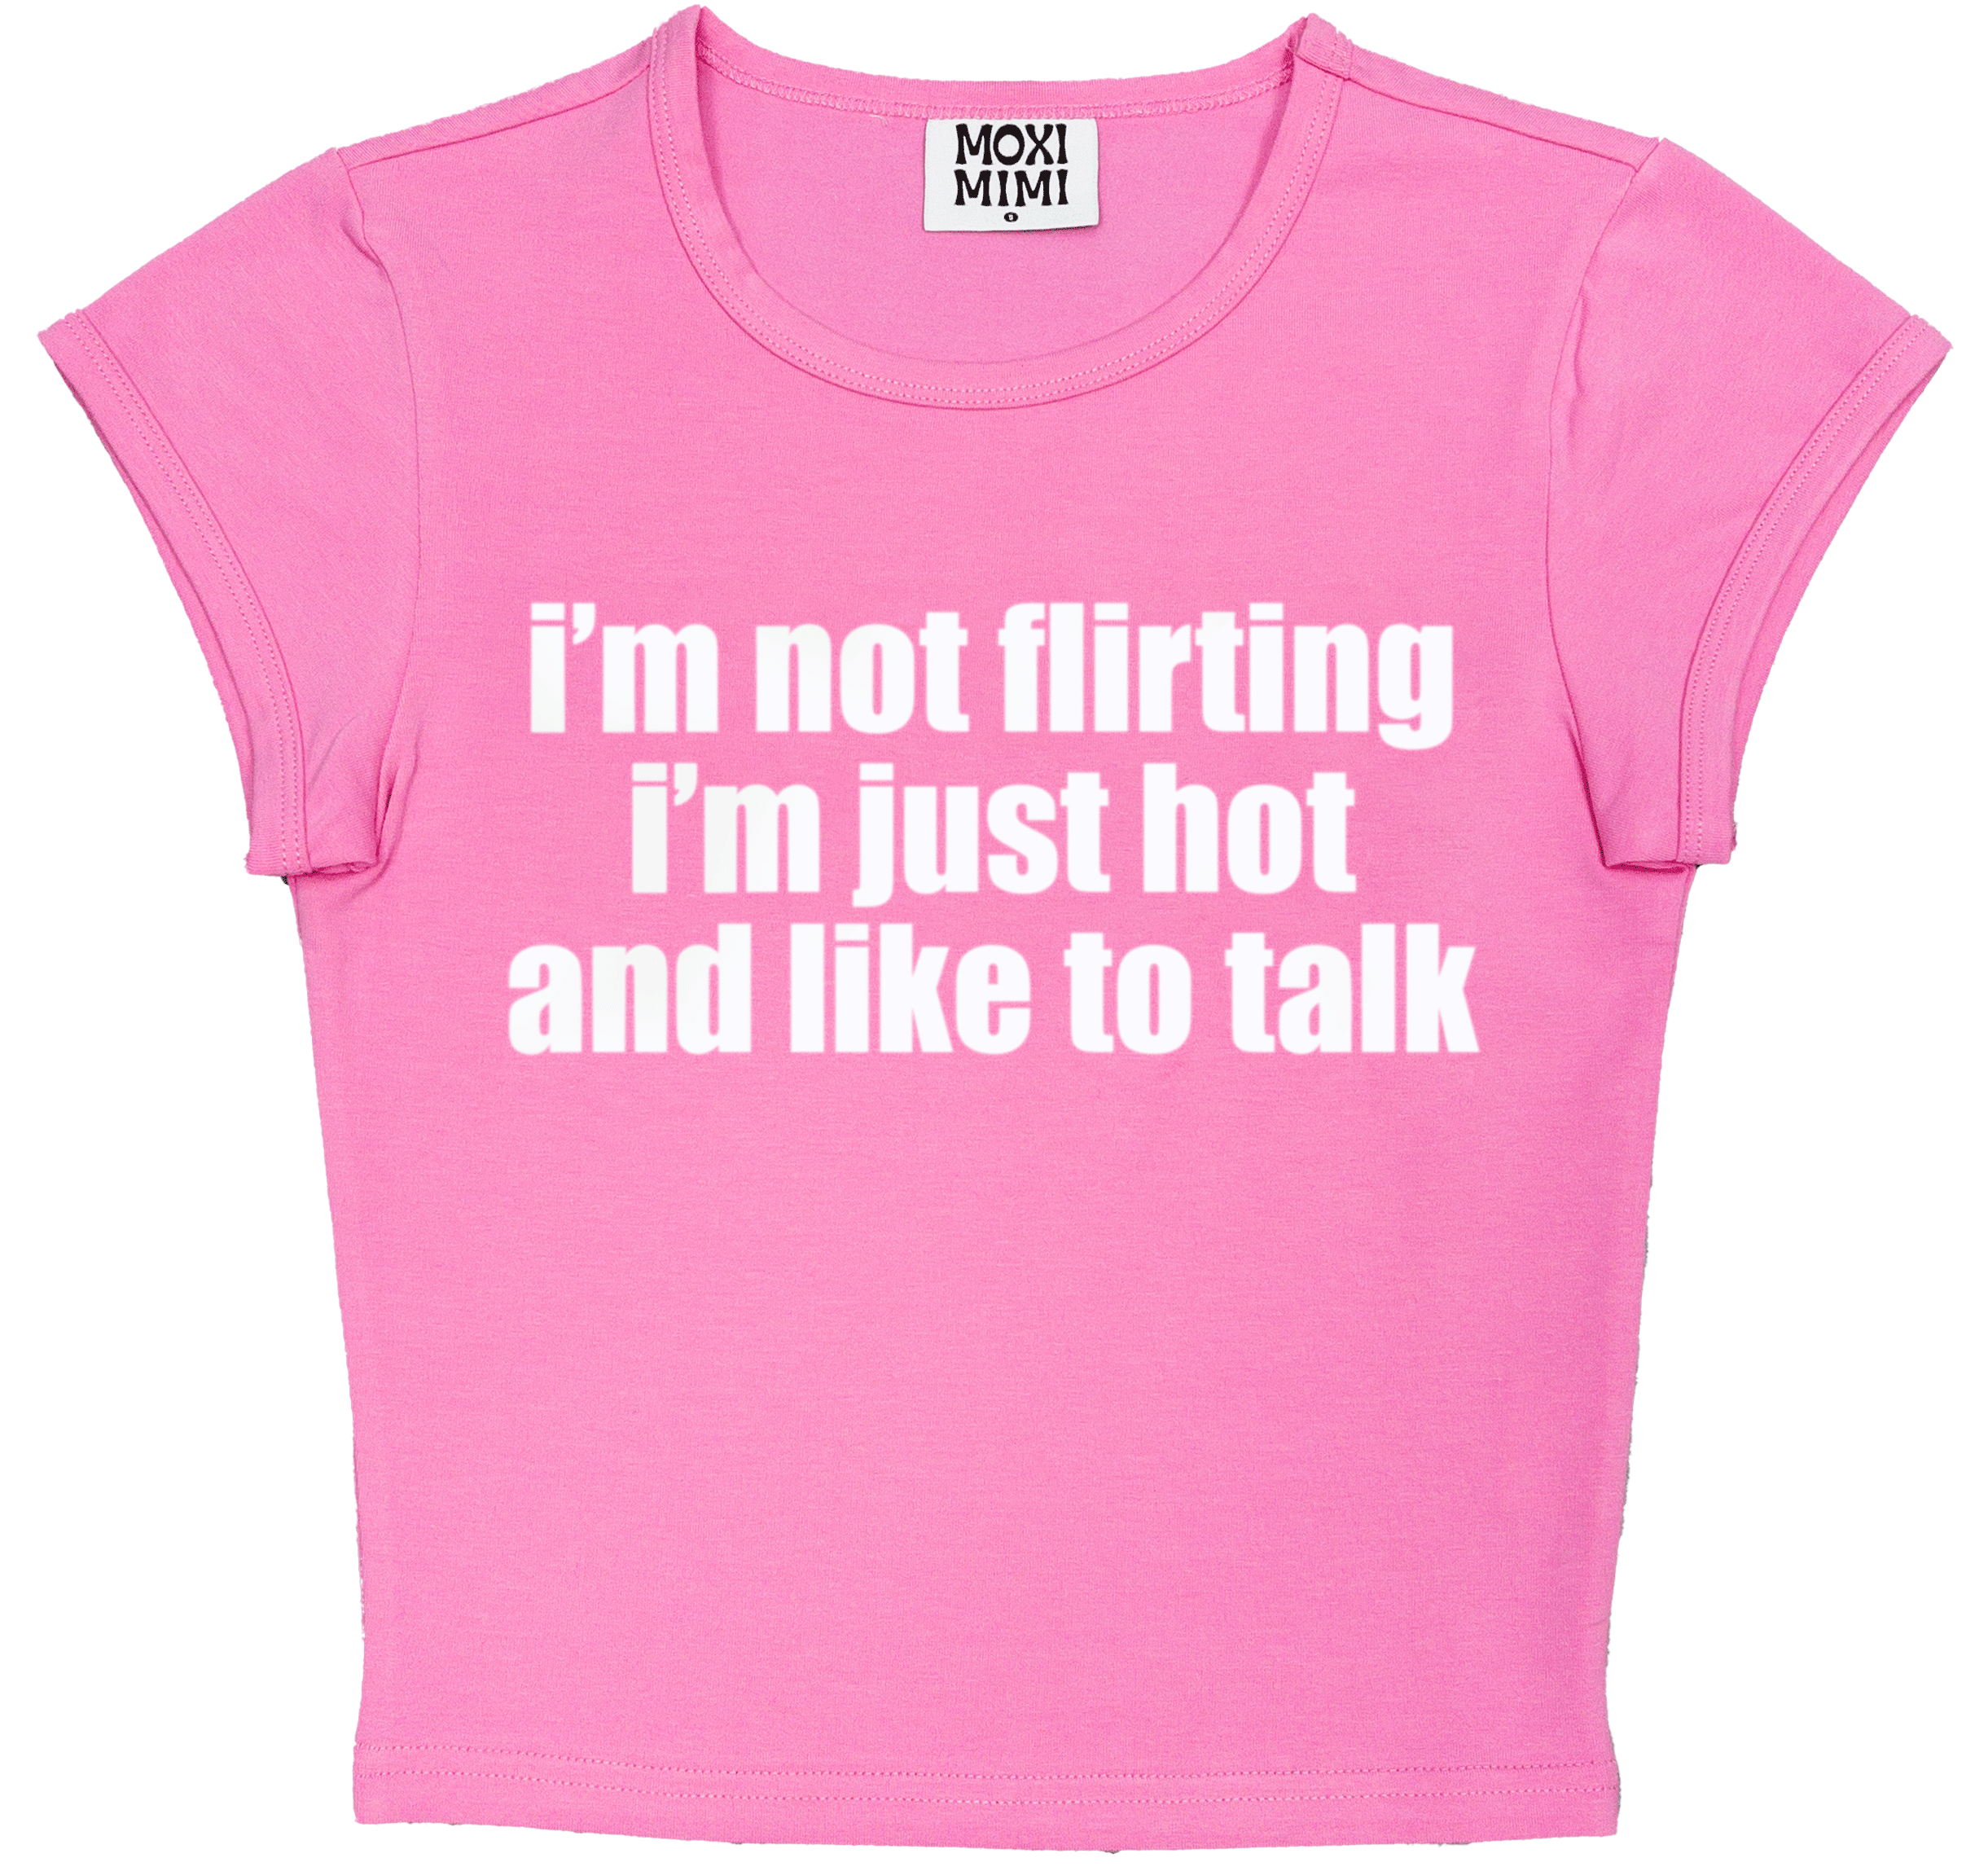 I'm Not Flirting I'm Just Hot and Like to Talk in Pink